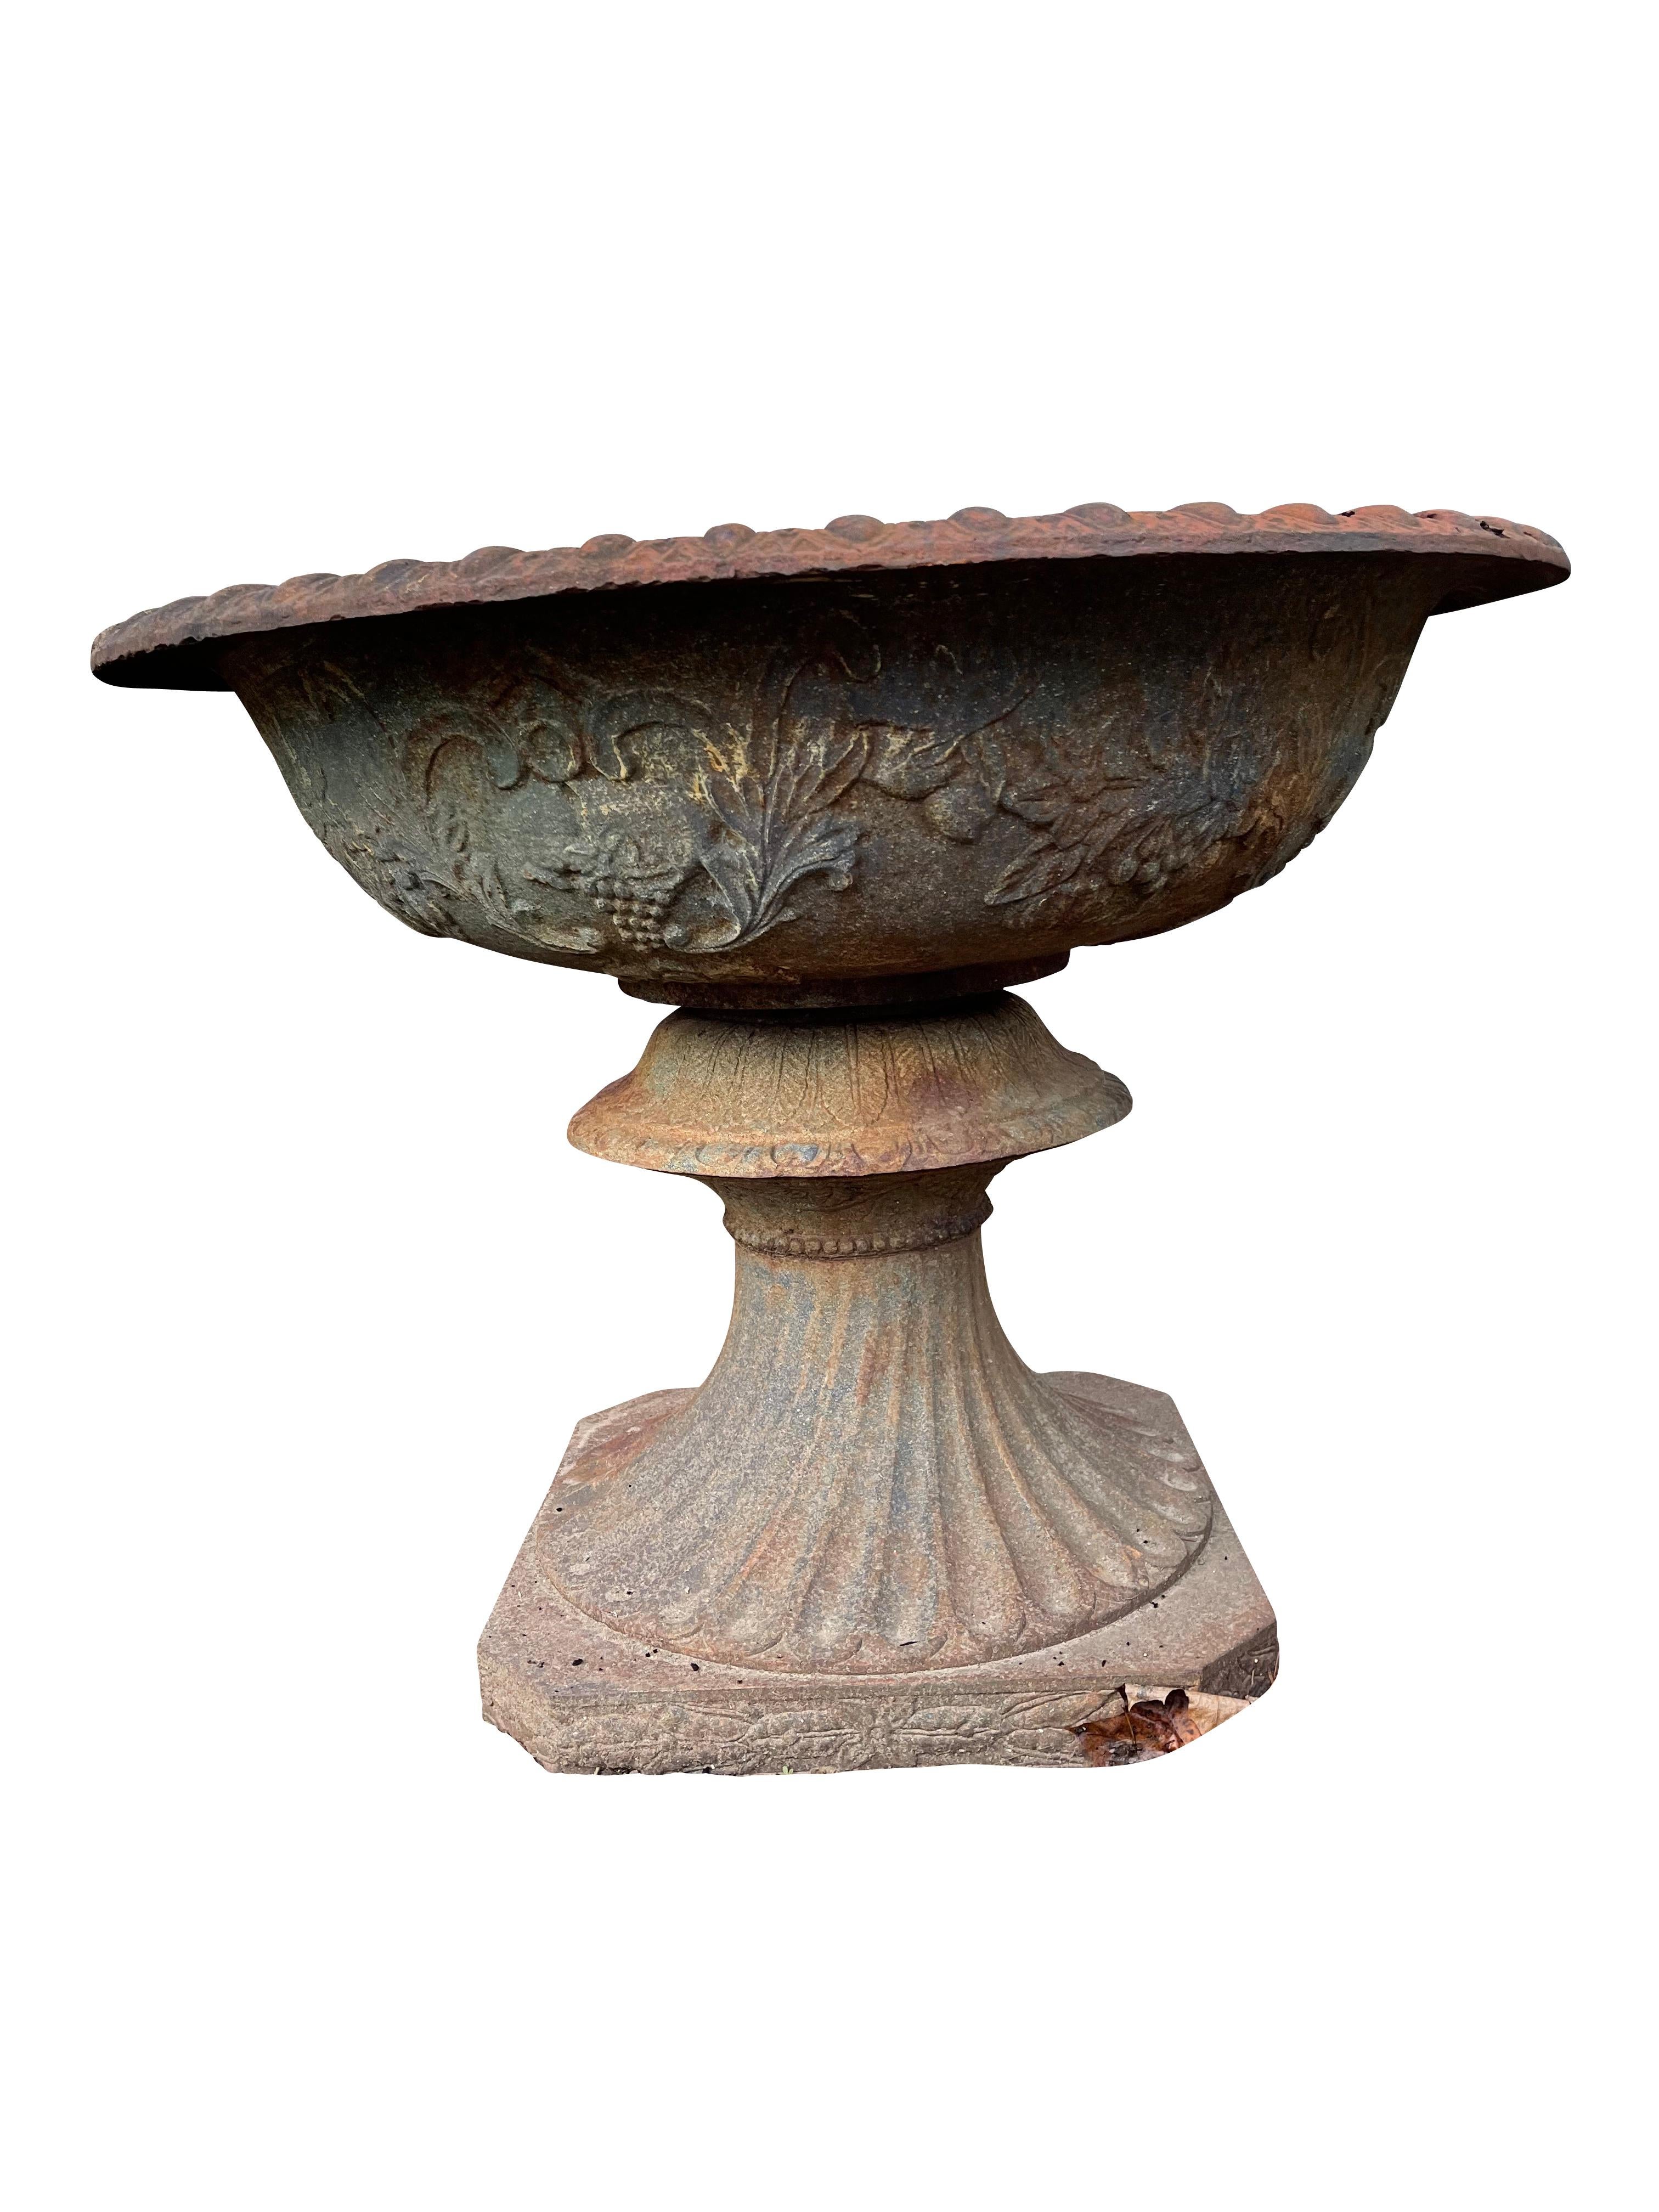 American  Cast Iron Urns with Foliate and Grape Design For Sale